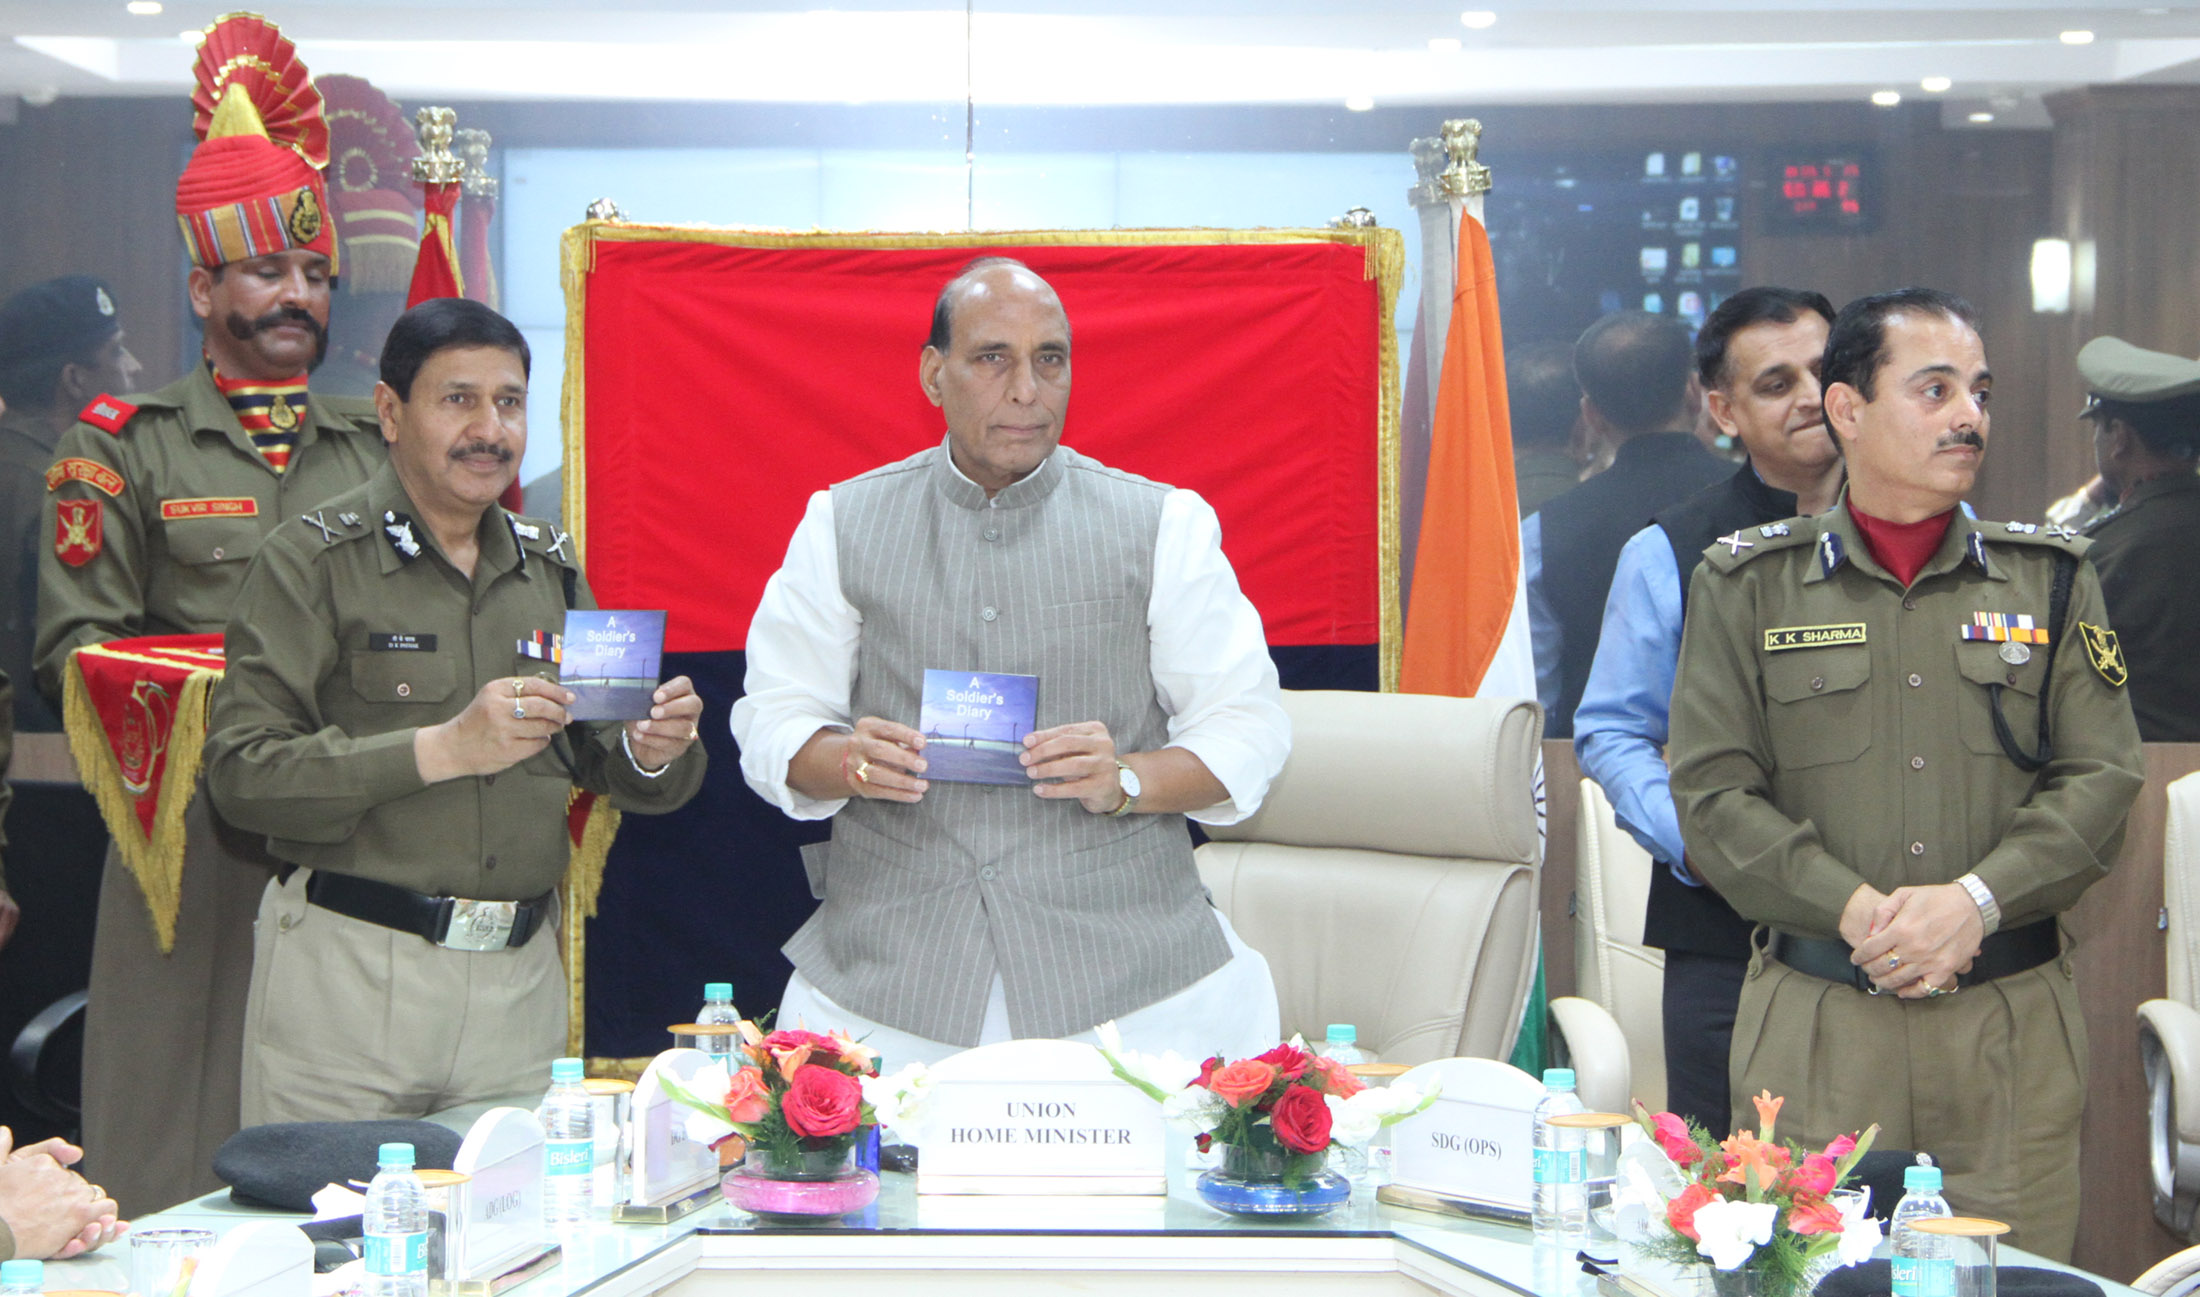 The Union Home Minister, Shri Rajnath Singh launching the BISAG project at BSF Headquarters, in New Delhi on February 26, 2016.